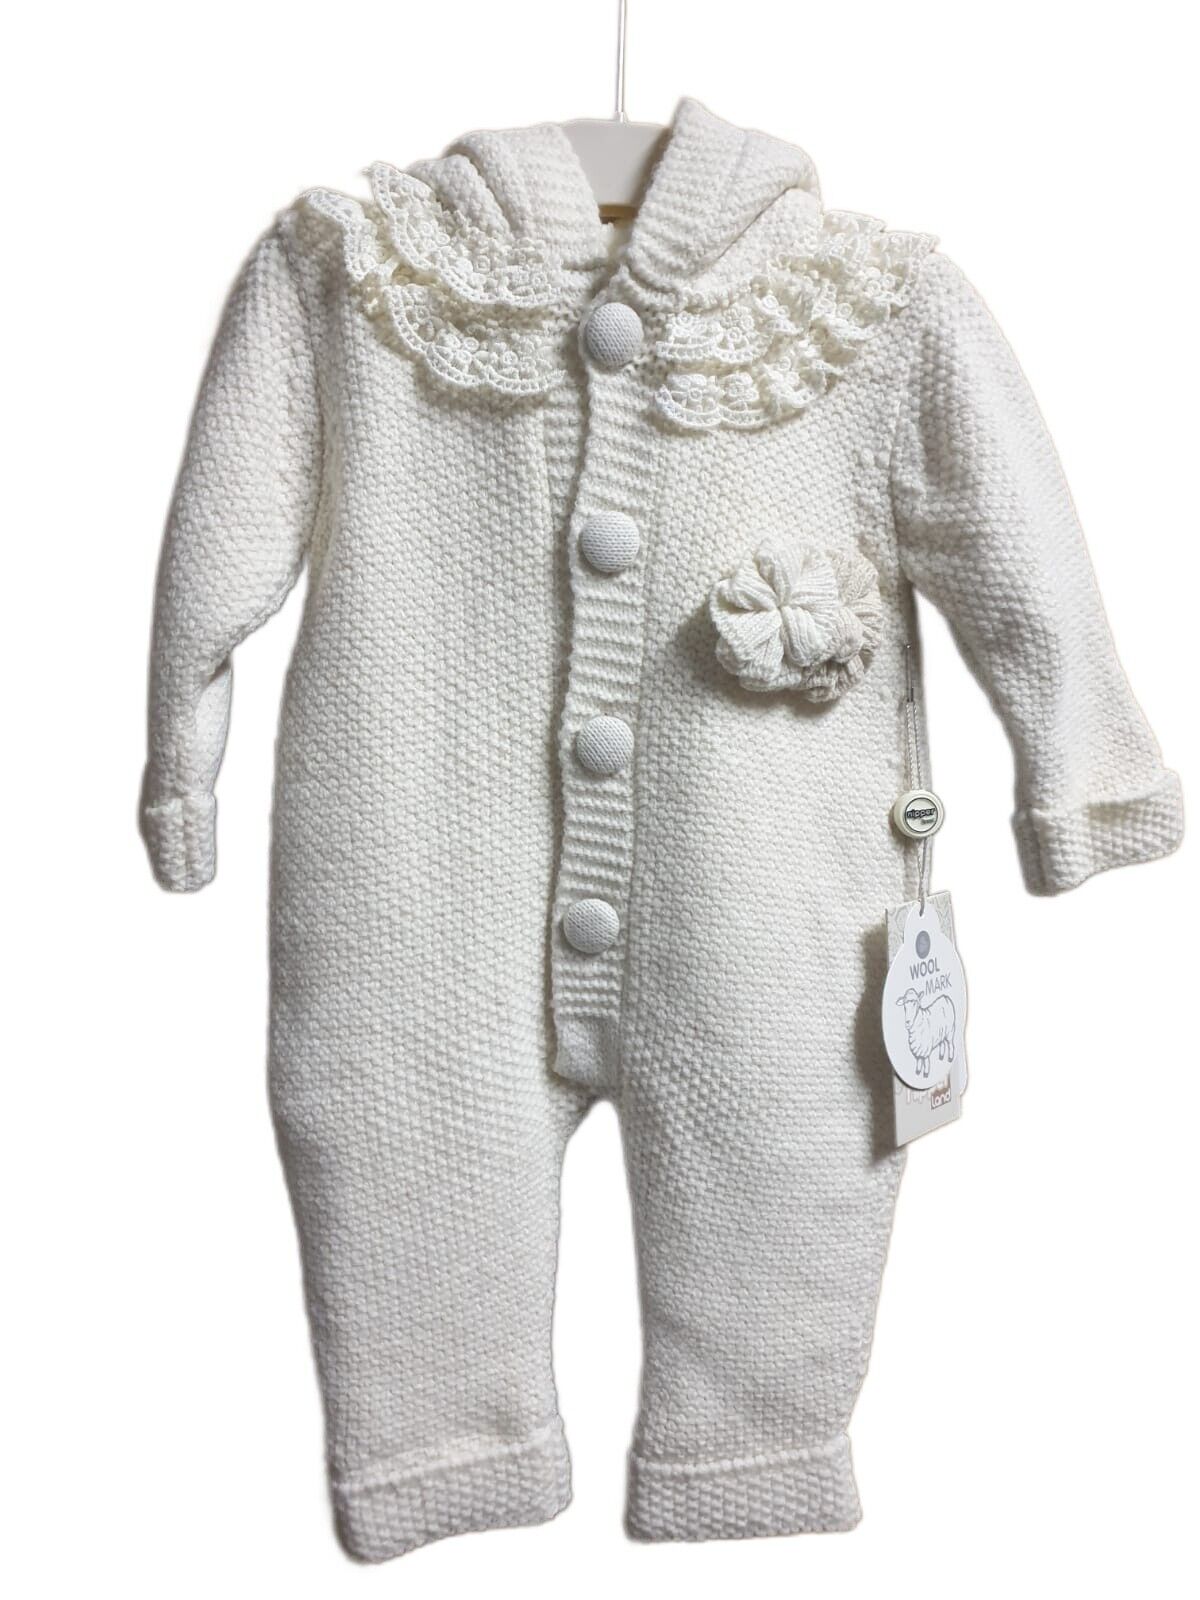 Baby Winter Jumpsuit Strick Overall Outfit mit kapuze Gr. 62 68 Knitted Creme